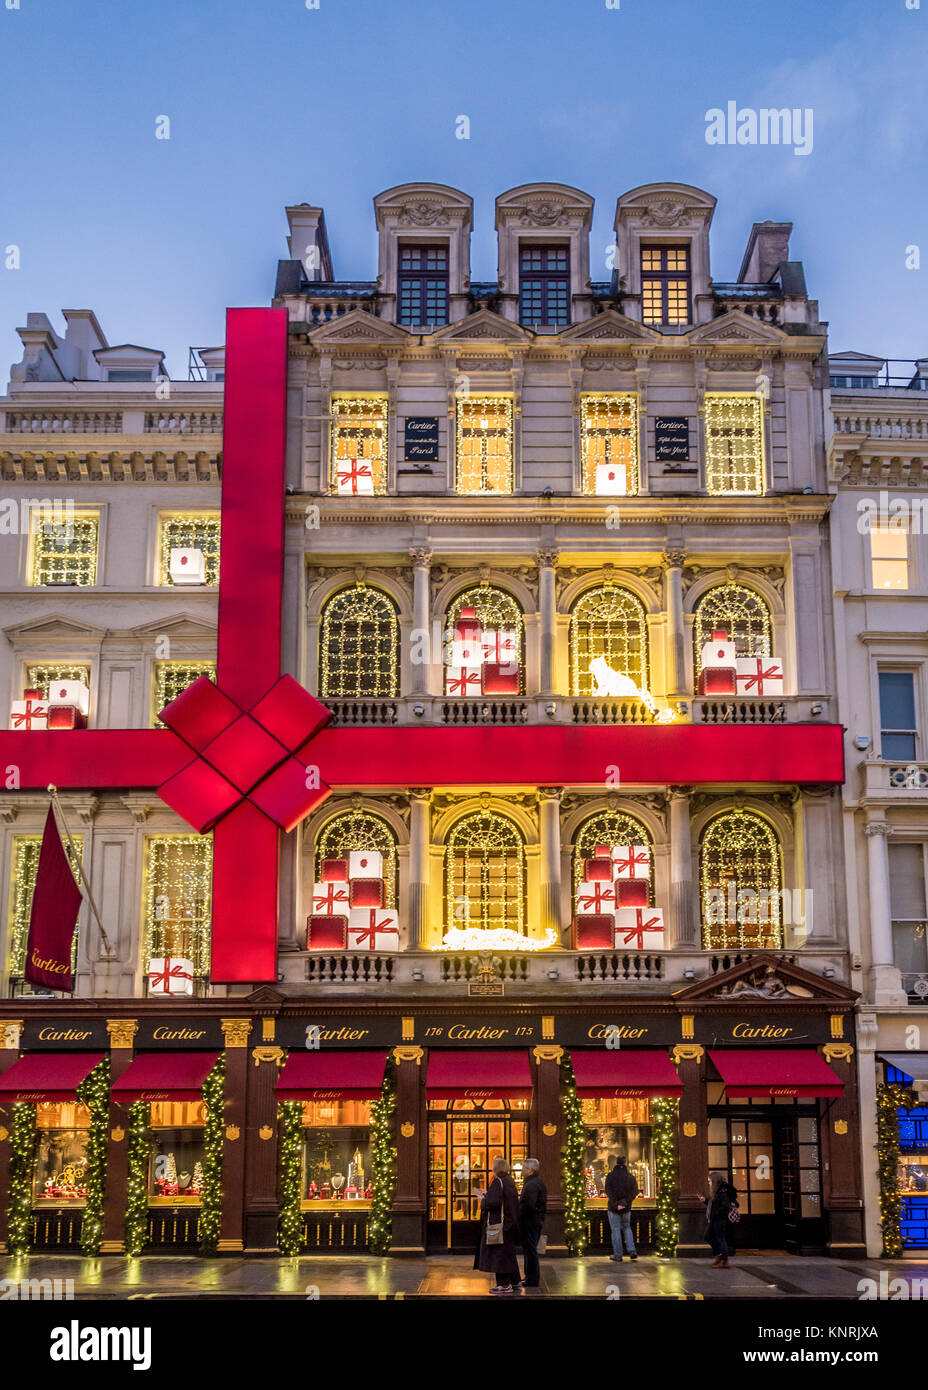 Cartier flagship store in Bond street with Christmas illuminations in London, UK Stock Photo